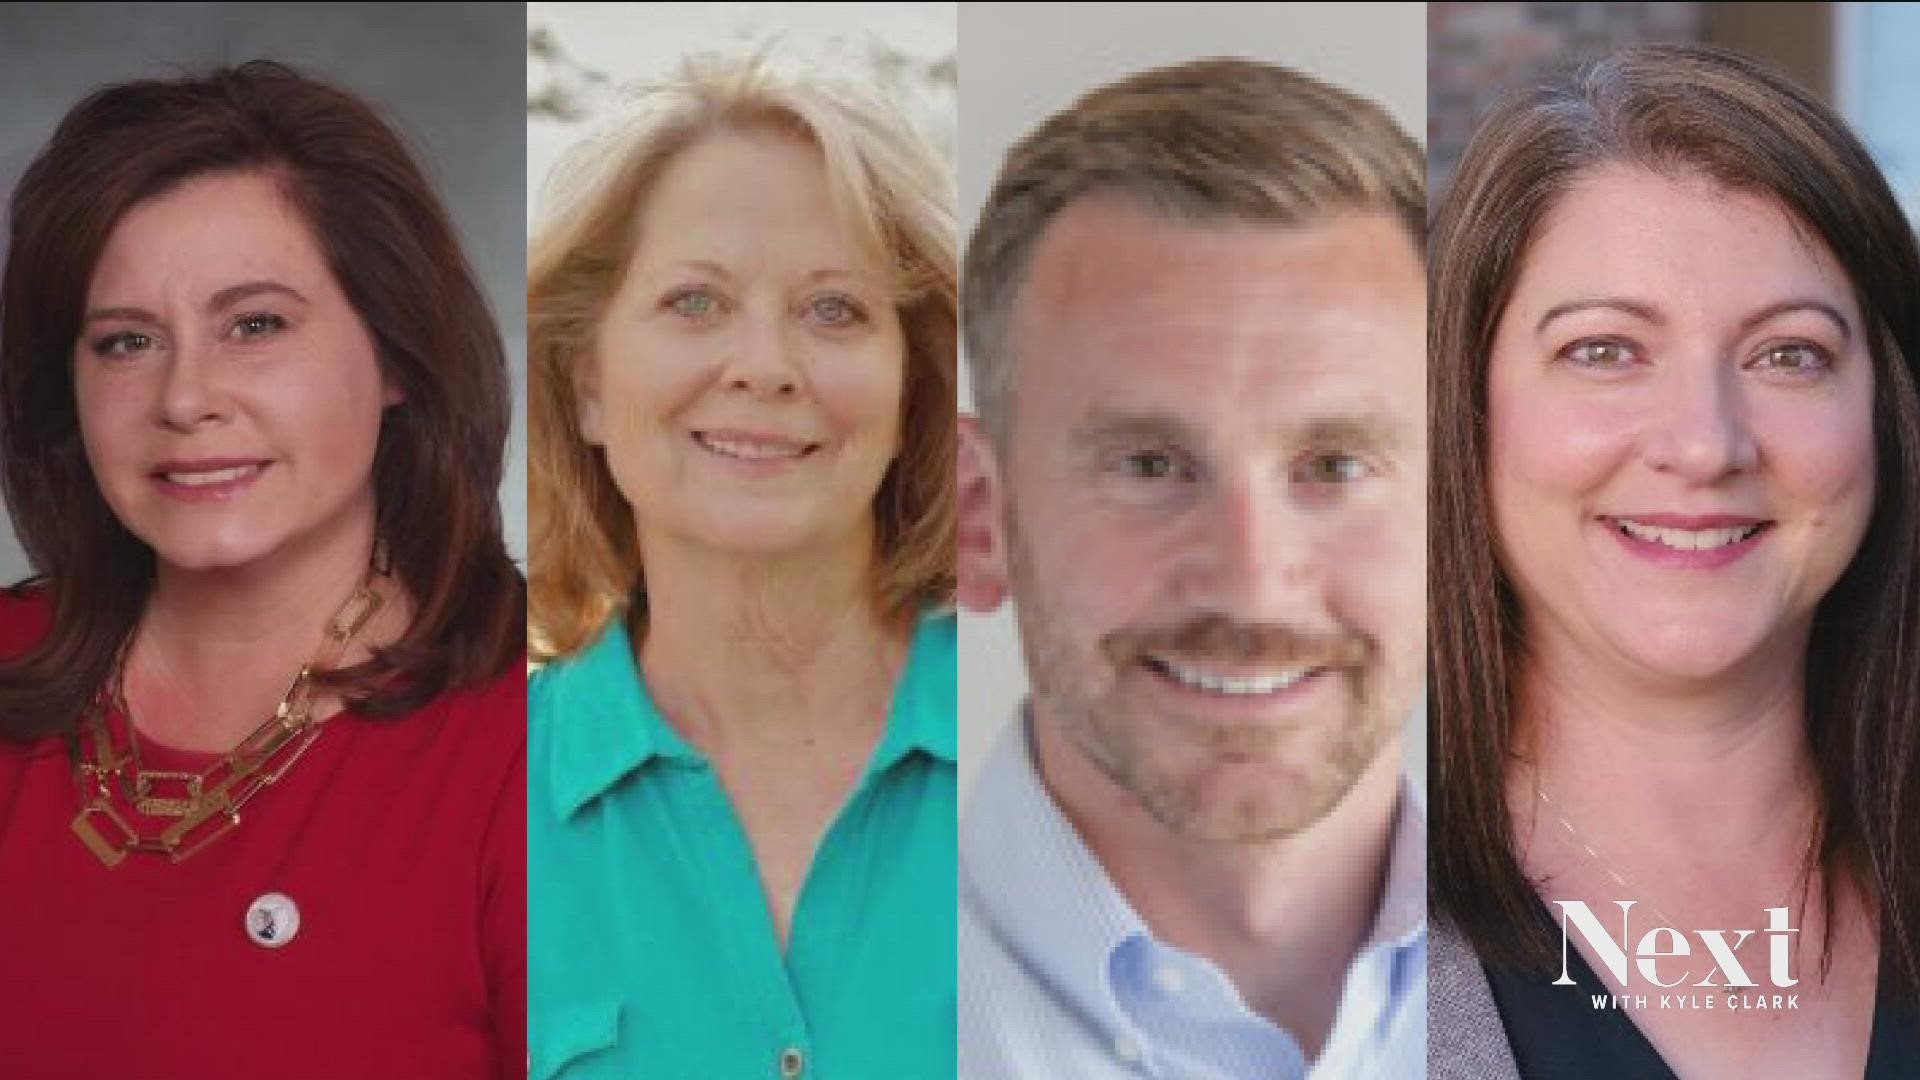 Four Republicans are set to compete in the primary, while Thornton Pediatrician Dr. Yadira Caraveo is the only Democrat who qualified for that primary.